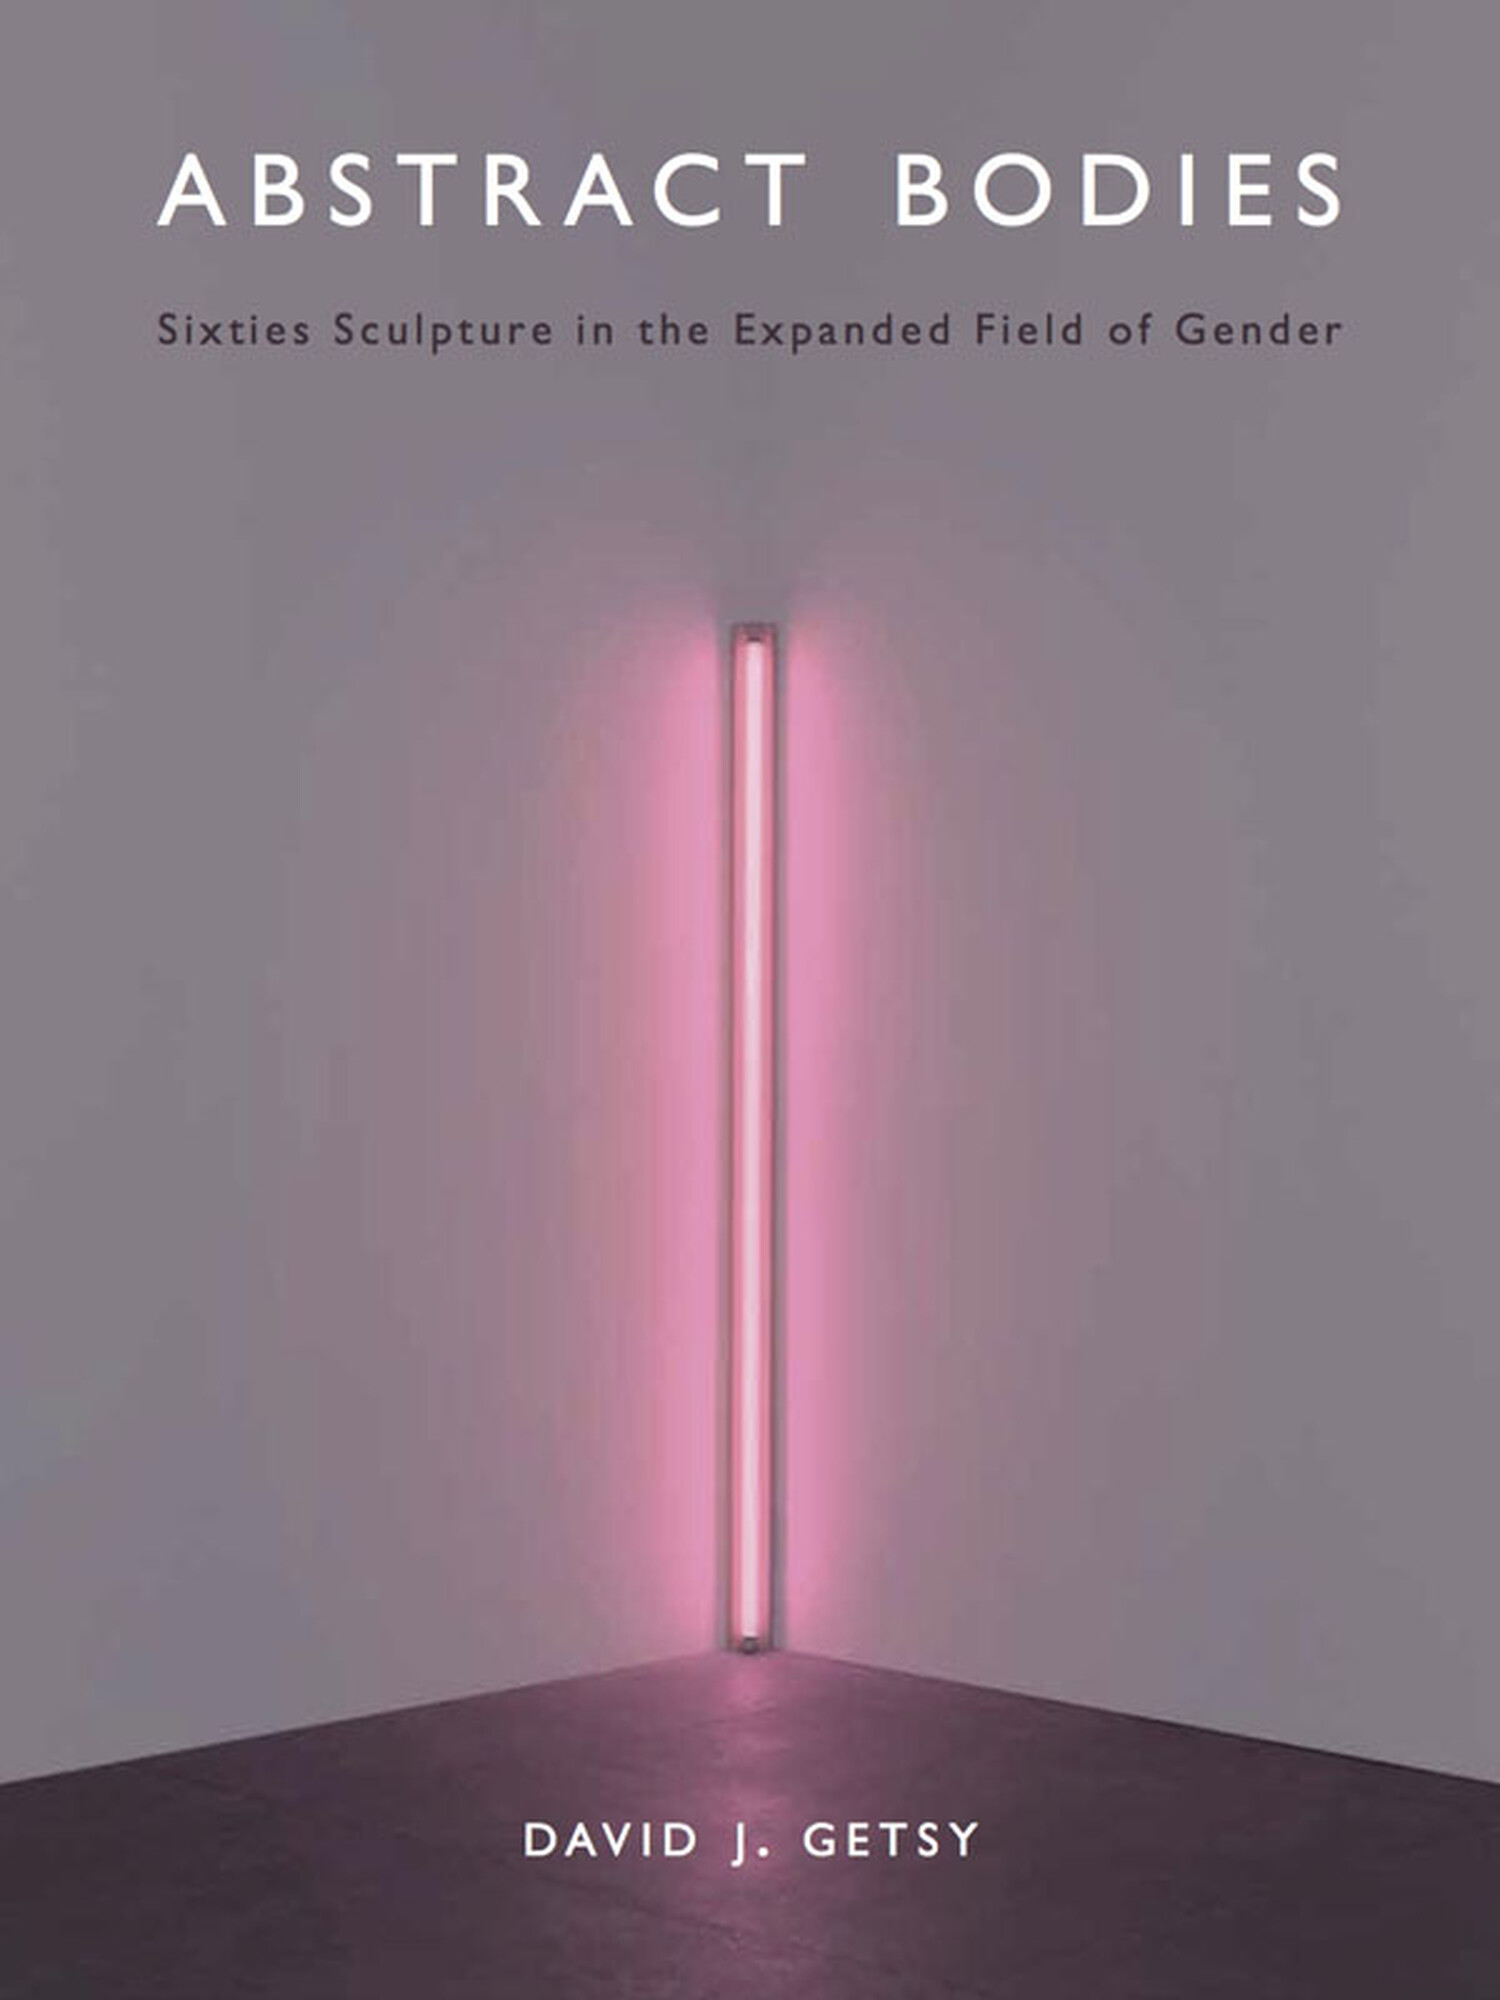 Abstract Bodies: Sixties Sculpture in the Expanded Field of Gender by David J. Getsy